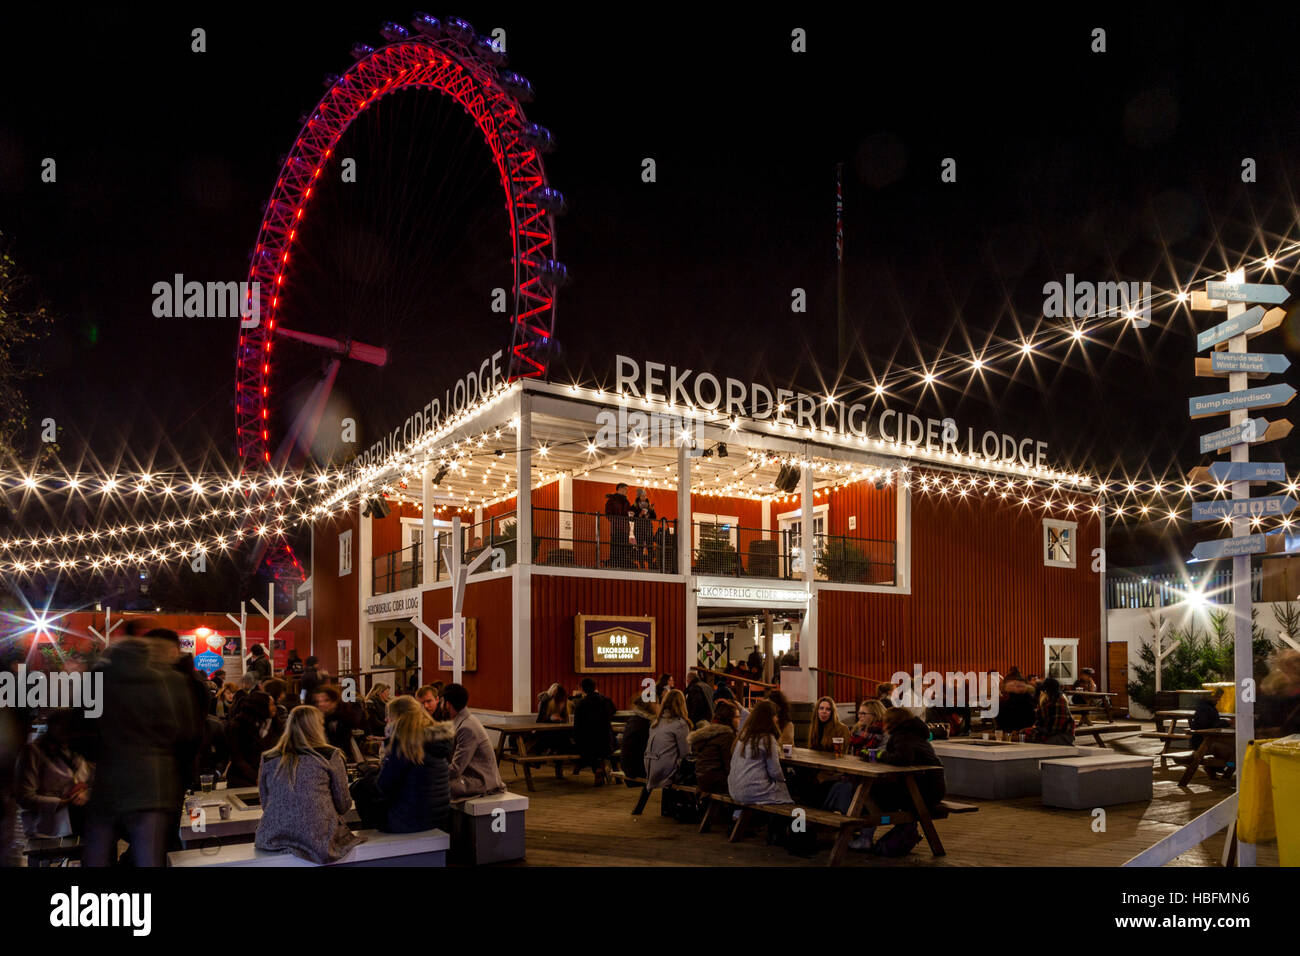 The Rekorderlig Cider Lodge At The Southbank Christmas Market, London, England Stock Photo